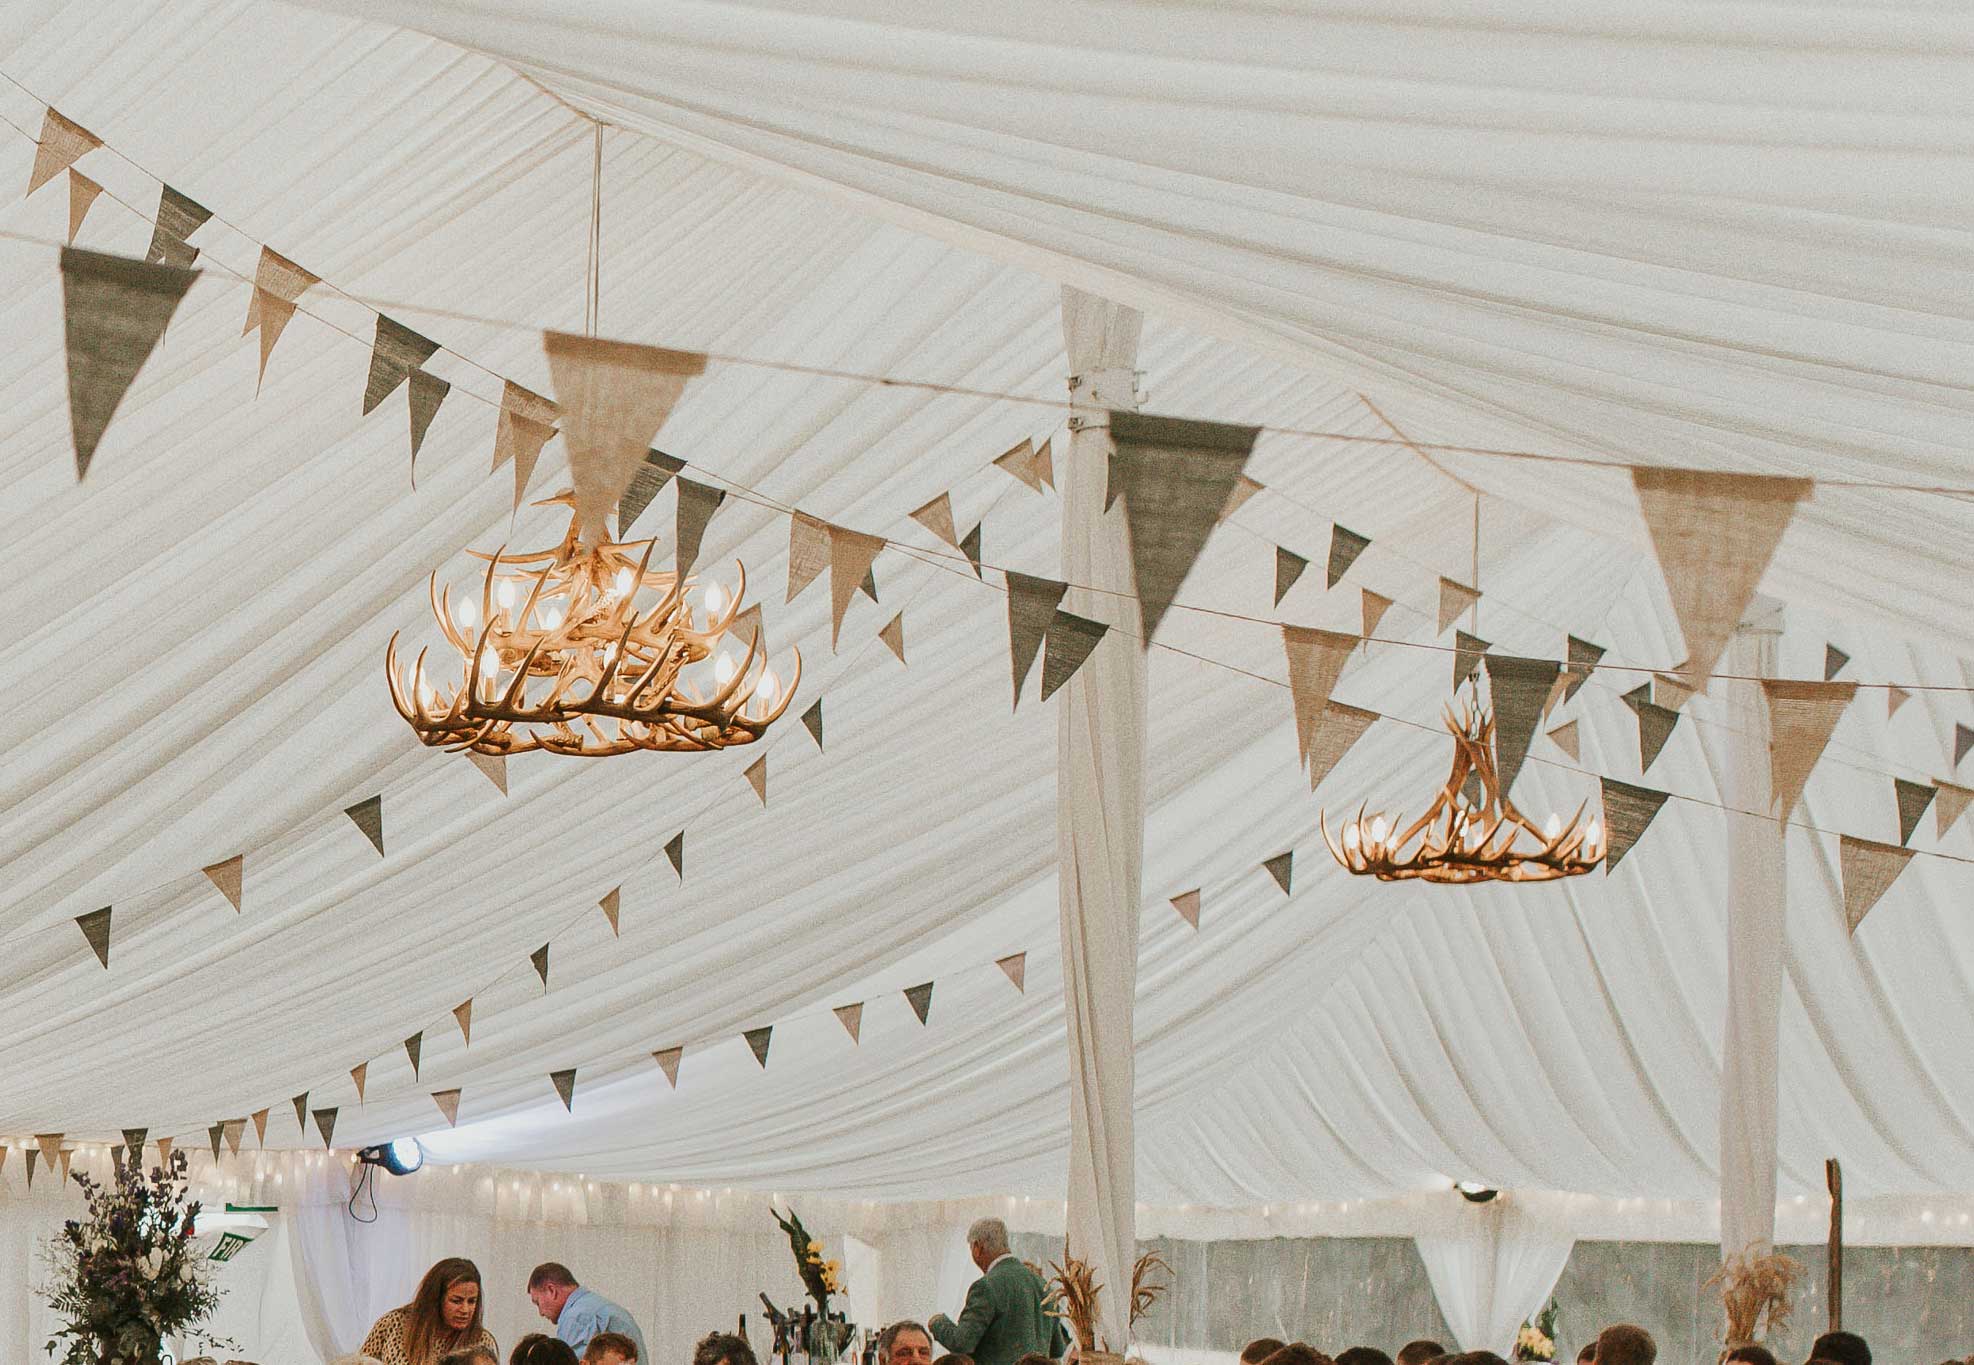 silk-estate-marquee-weddings-and-events-styling-and-hire-lighting-chandelier-2